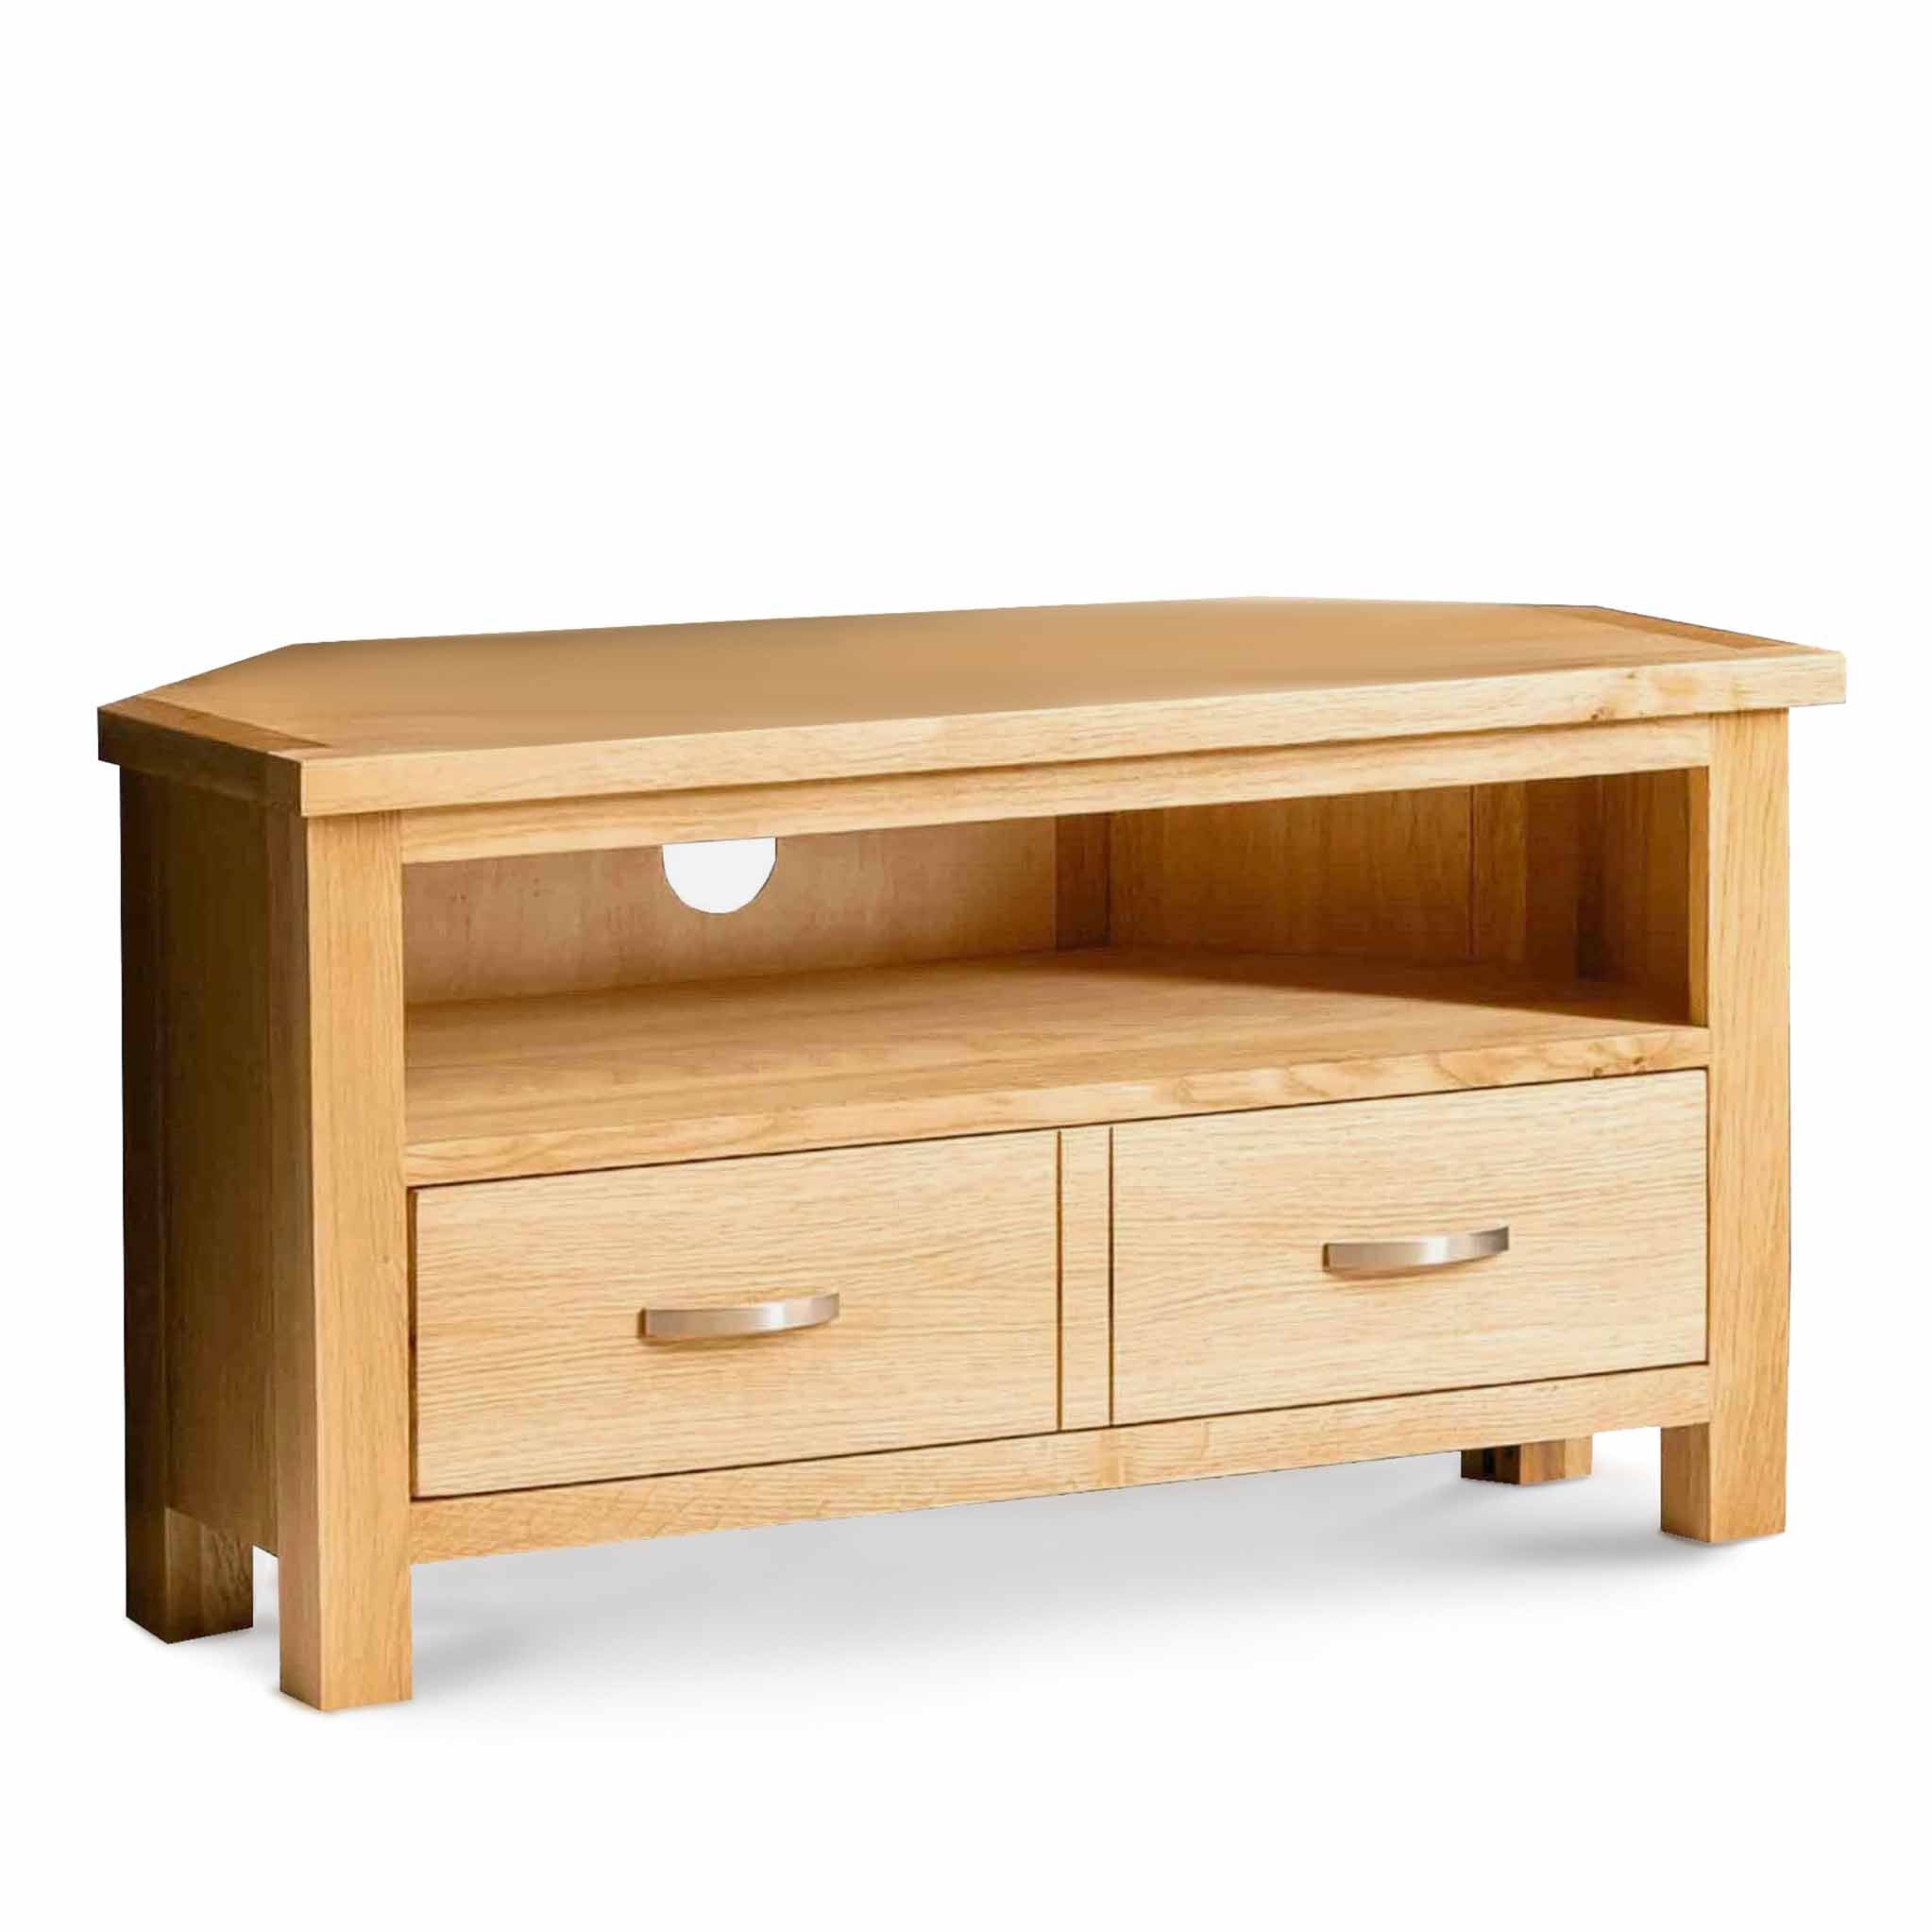 London Oak Corner Tv Stand For Screens Up To 42 Solid Wood